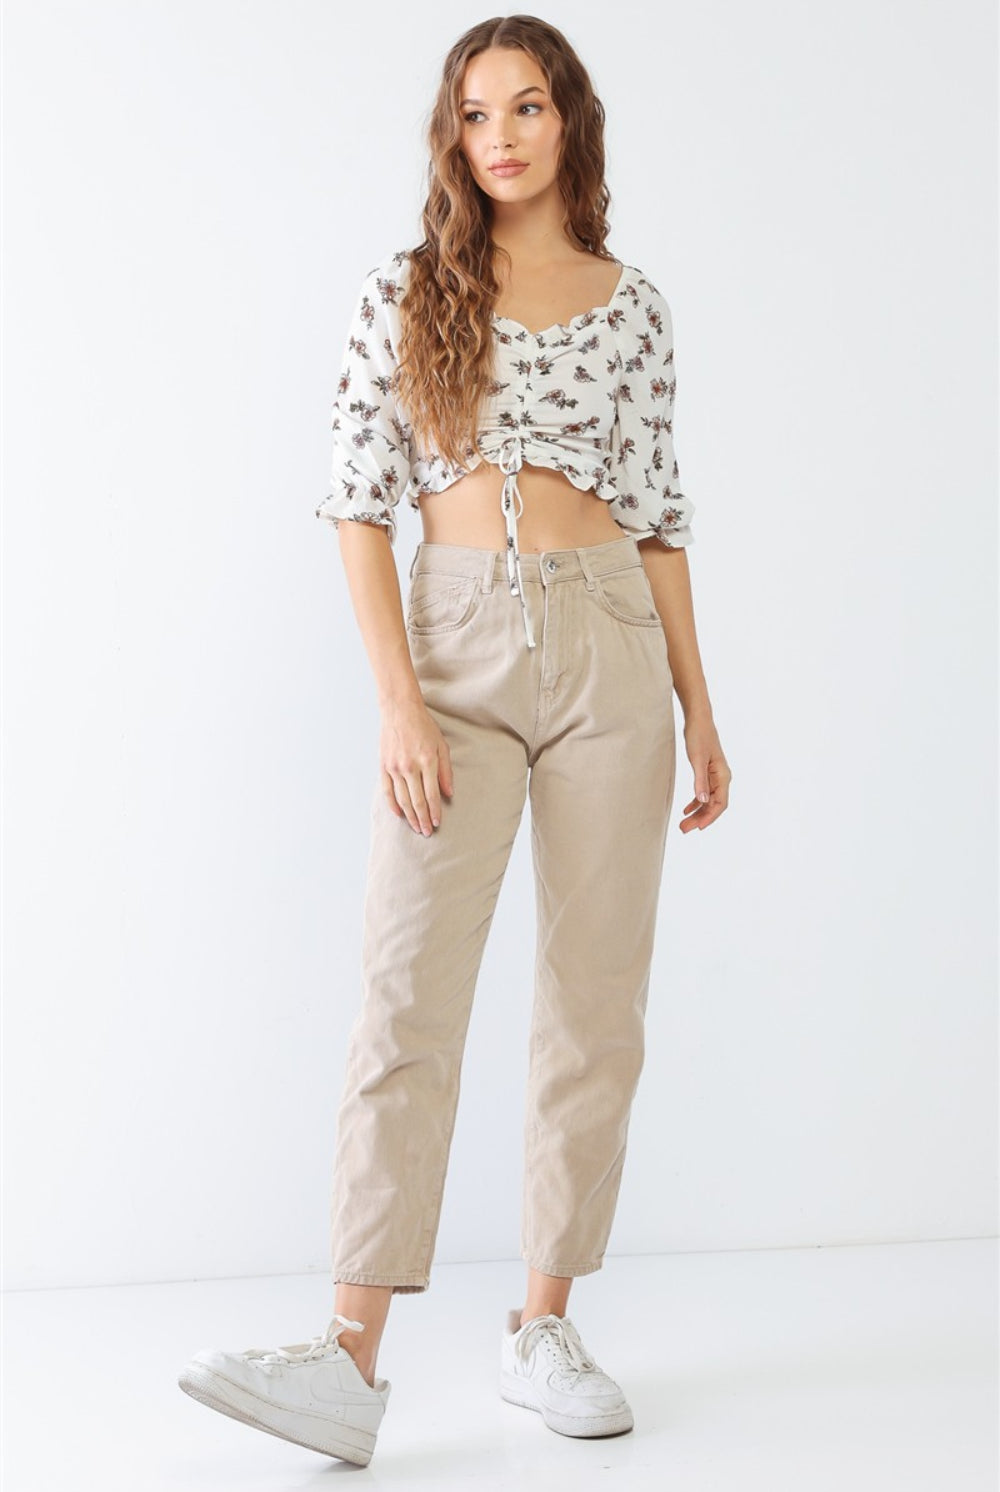 A woman in a white floral ruffled crop top, paired with casual beige pants for a fresh and trendy look.